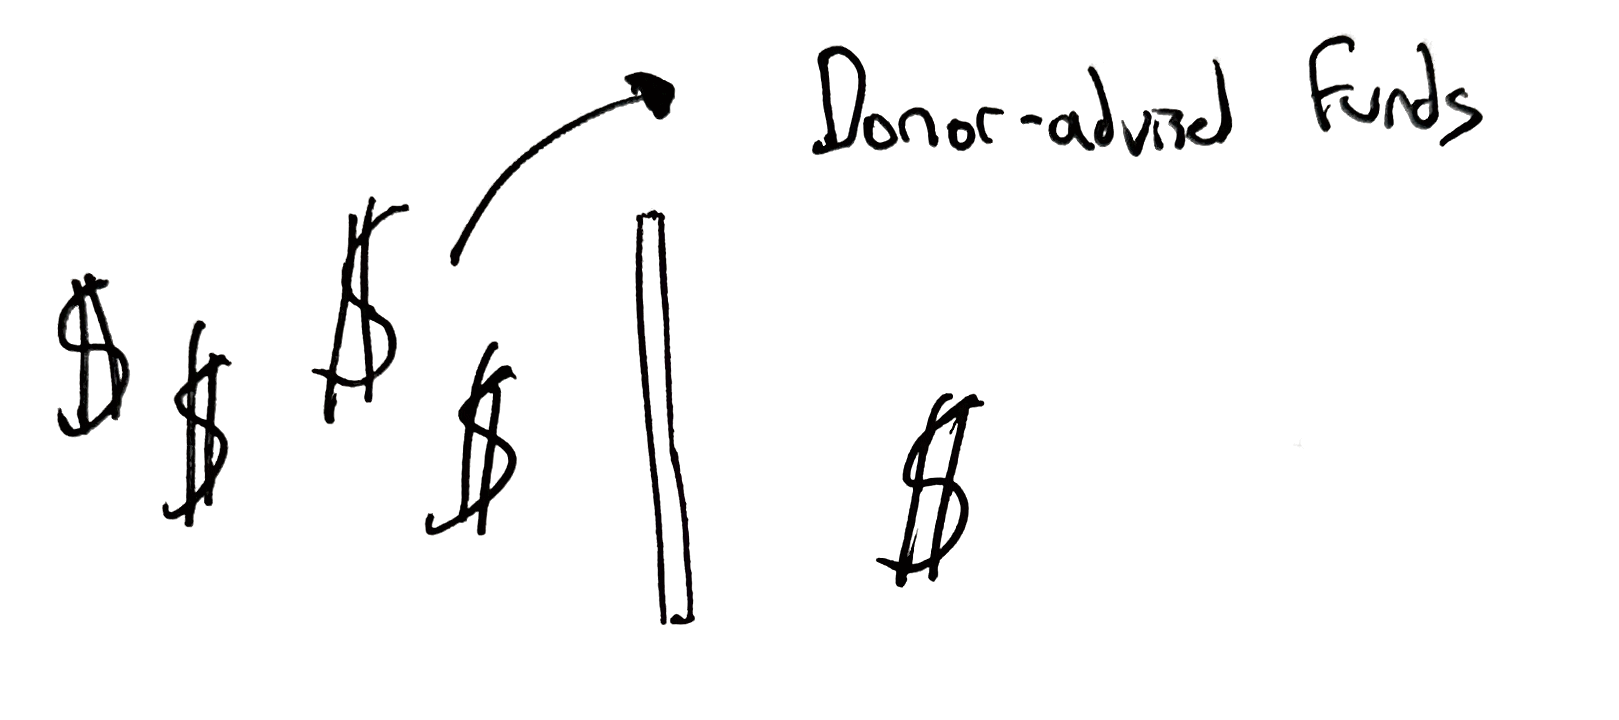 A hand drawn comic that depicts a small wall with dollar signs on the left side of the wall and one dollar sign being moved over to the right side with the text 'Donor-advised funds' above it.